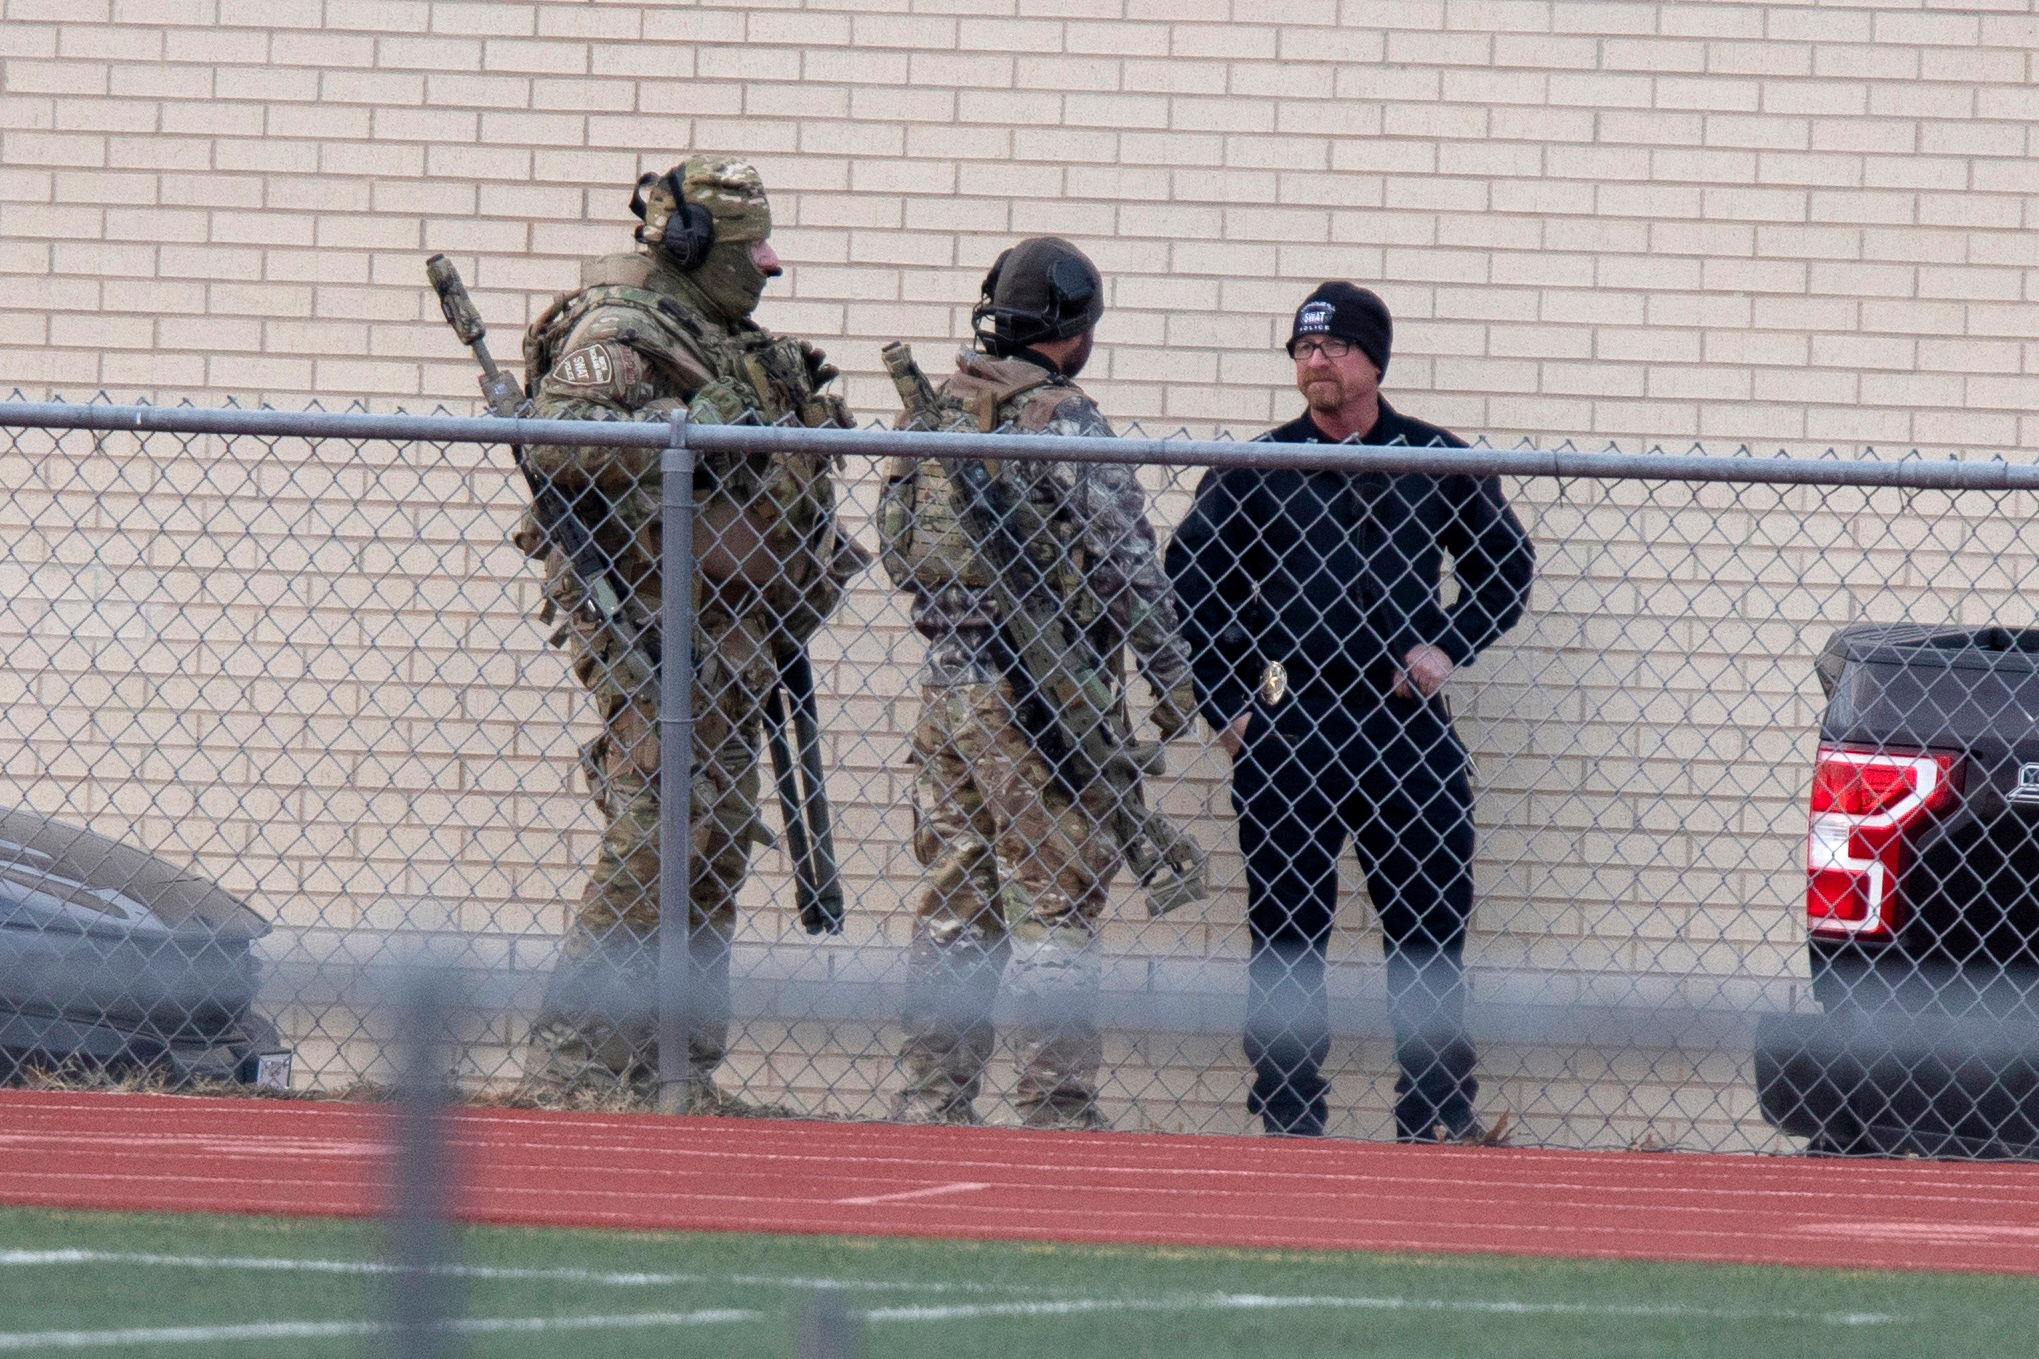 Colleyville hostage situation: How did the incident unfold?